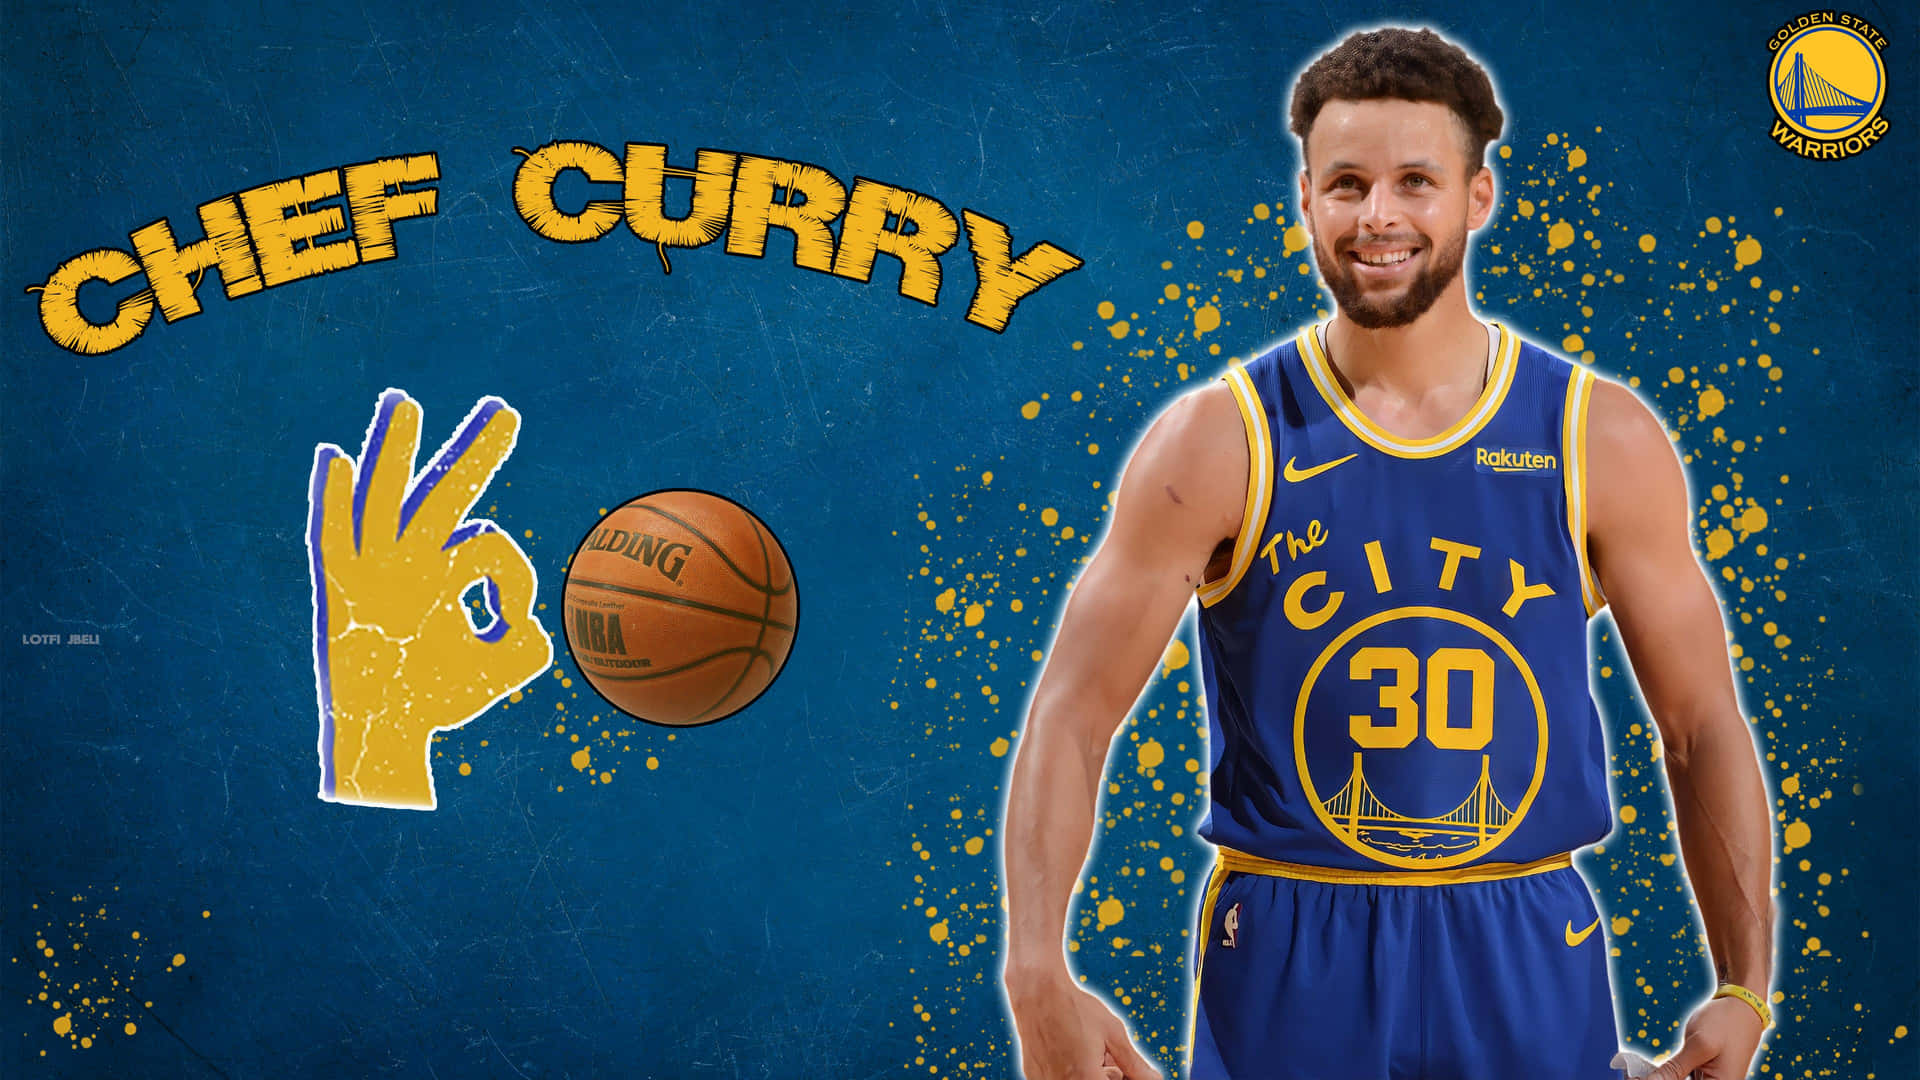 100+] Stephen Curry 4k Wallpapers